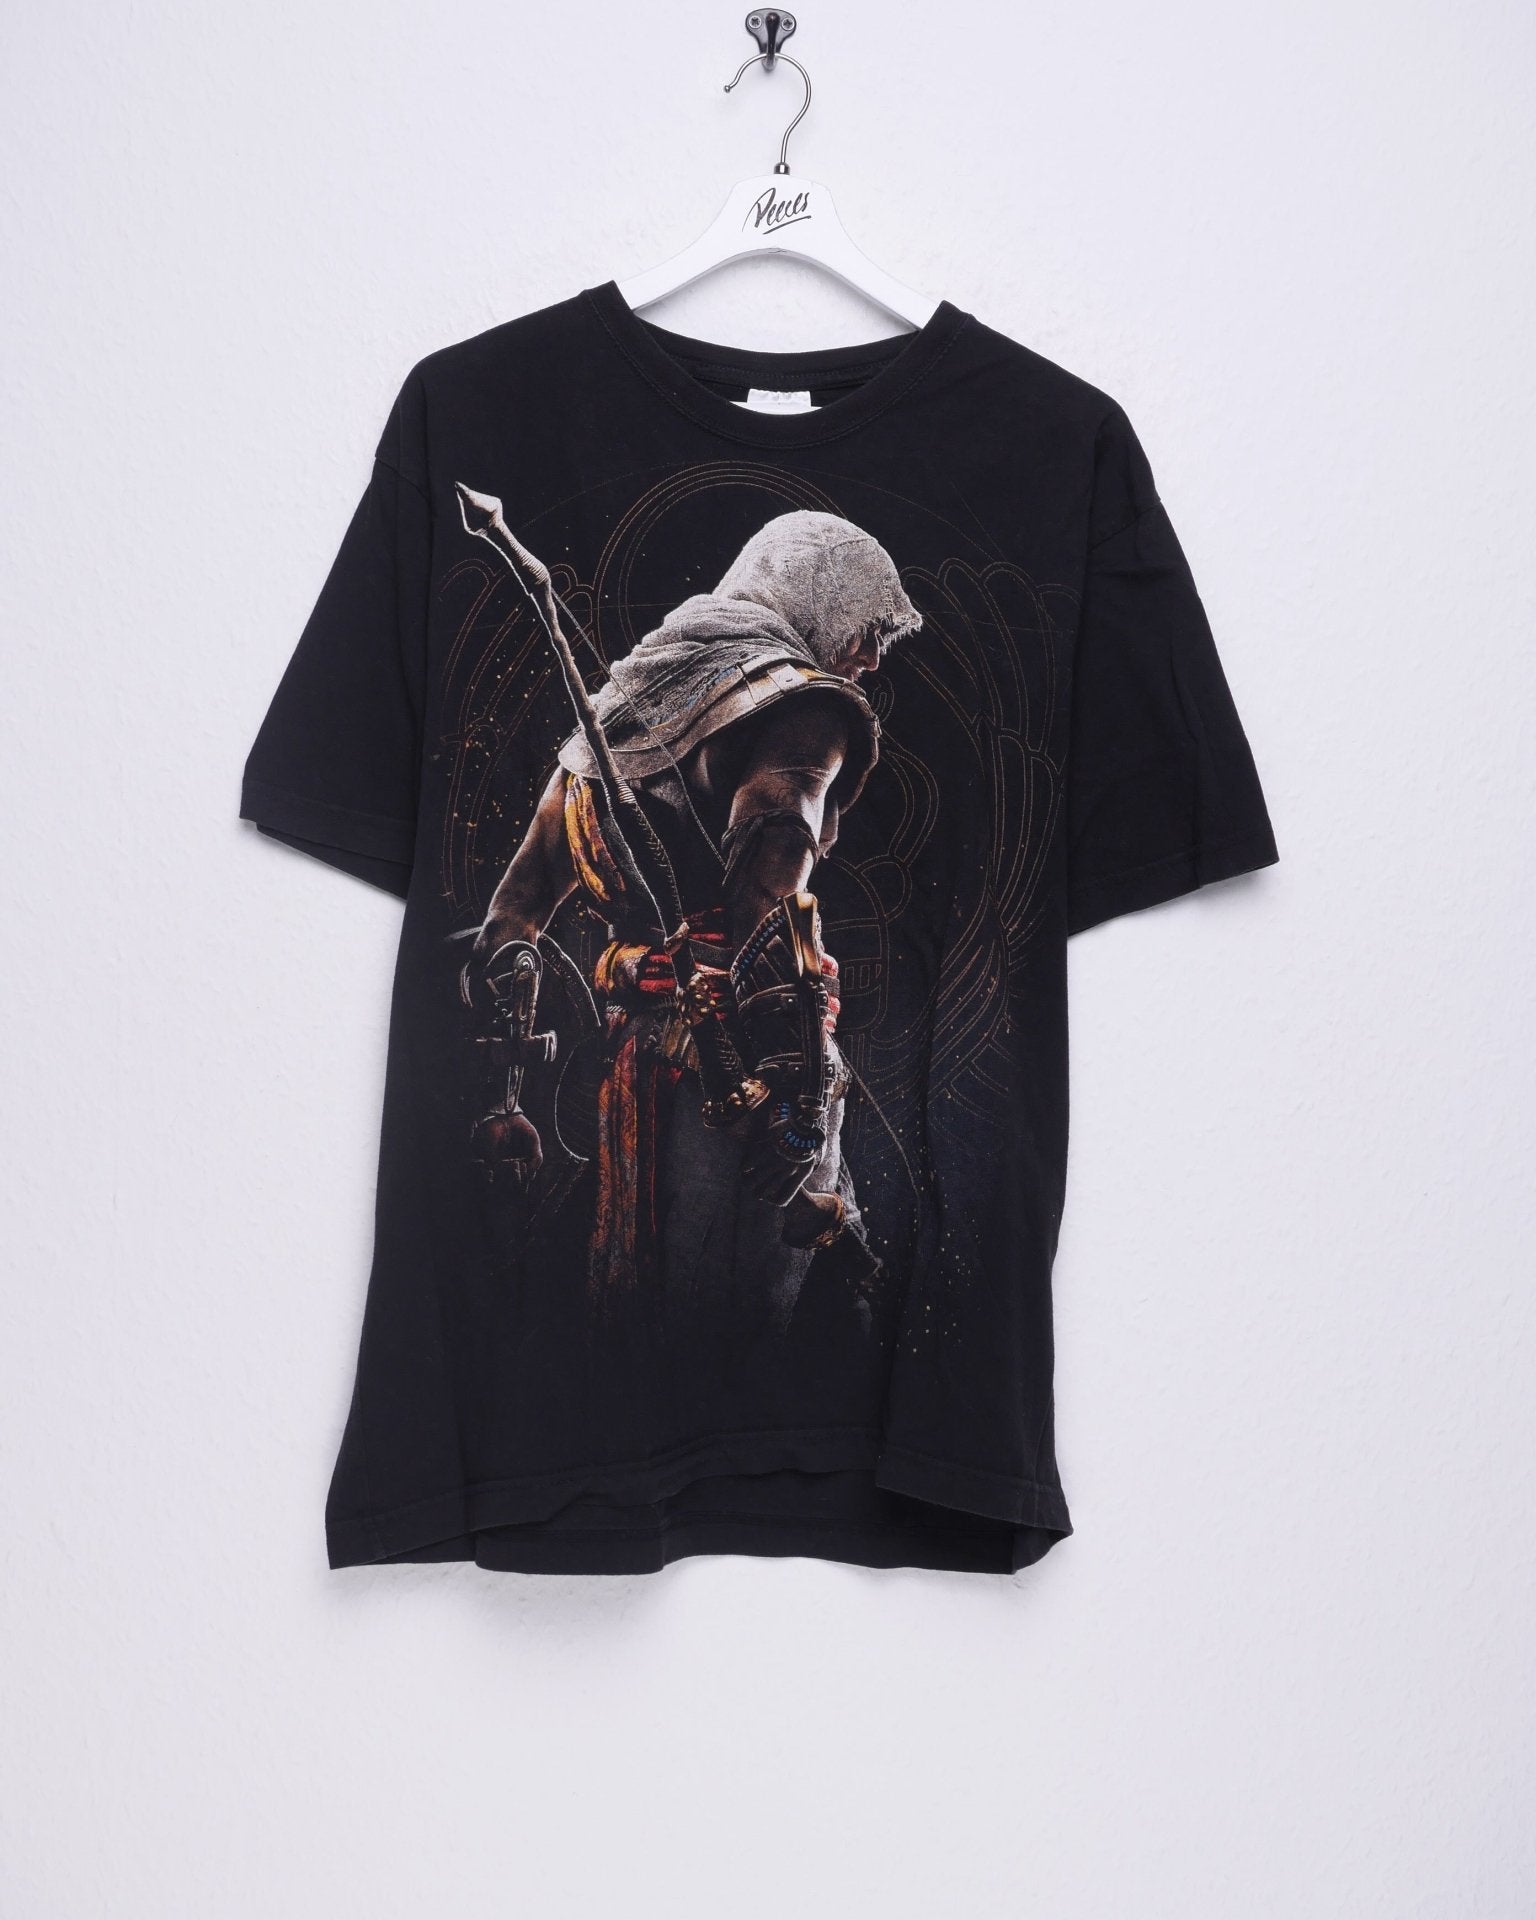 Assassin'S Creed printed Graphic black Shirt - Peeces